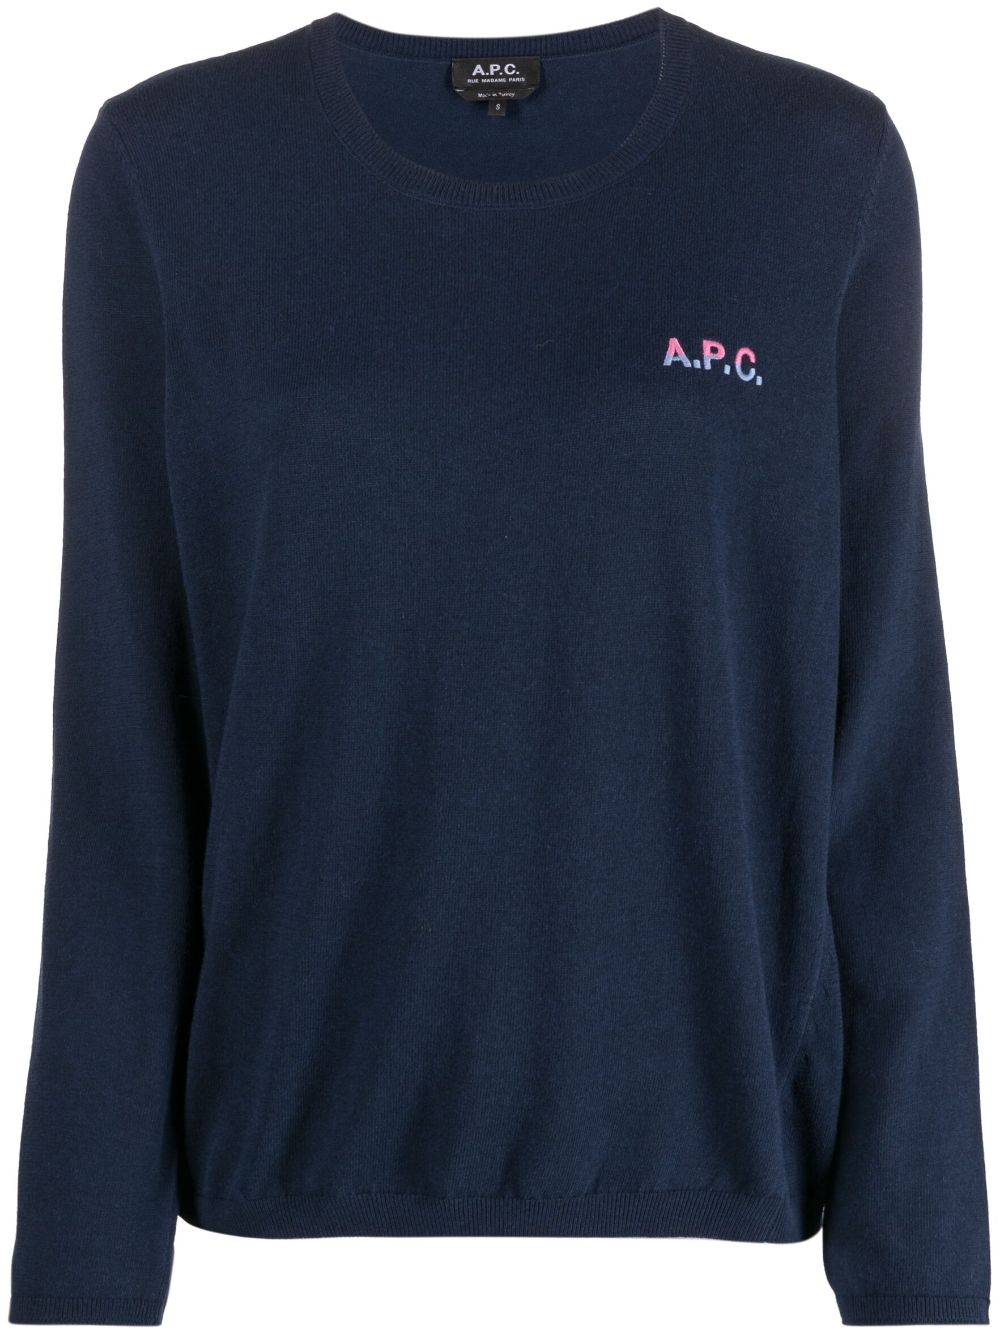 A.P.C. BLUE PULLOVER